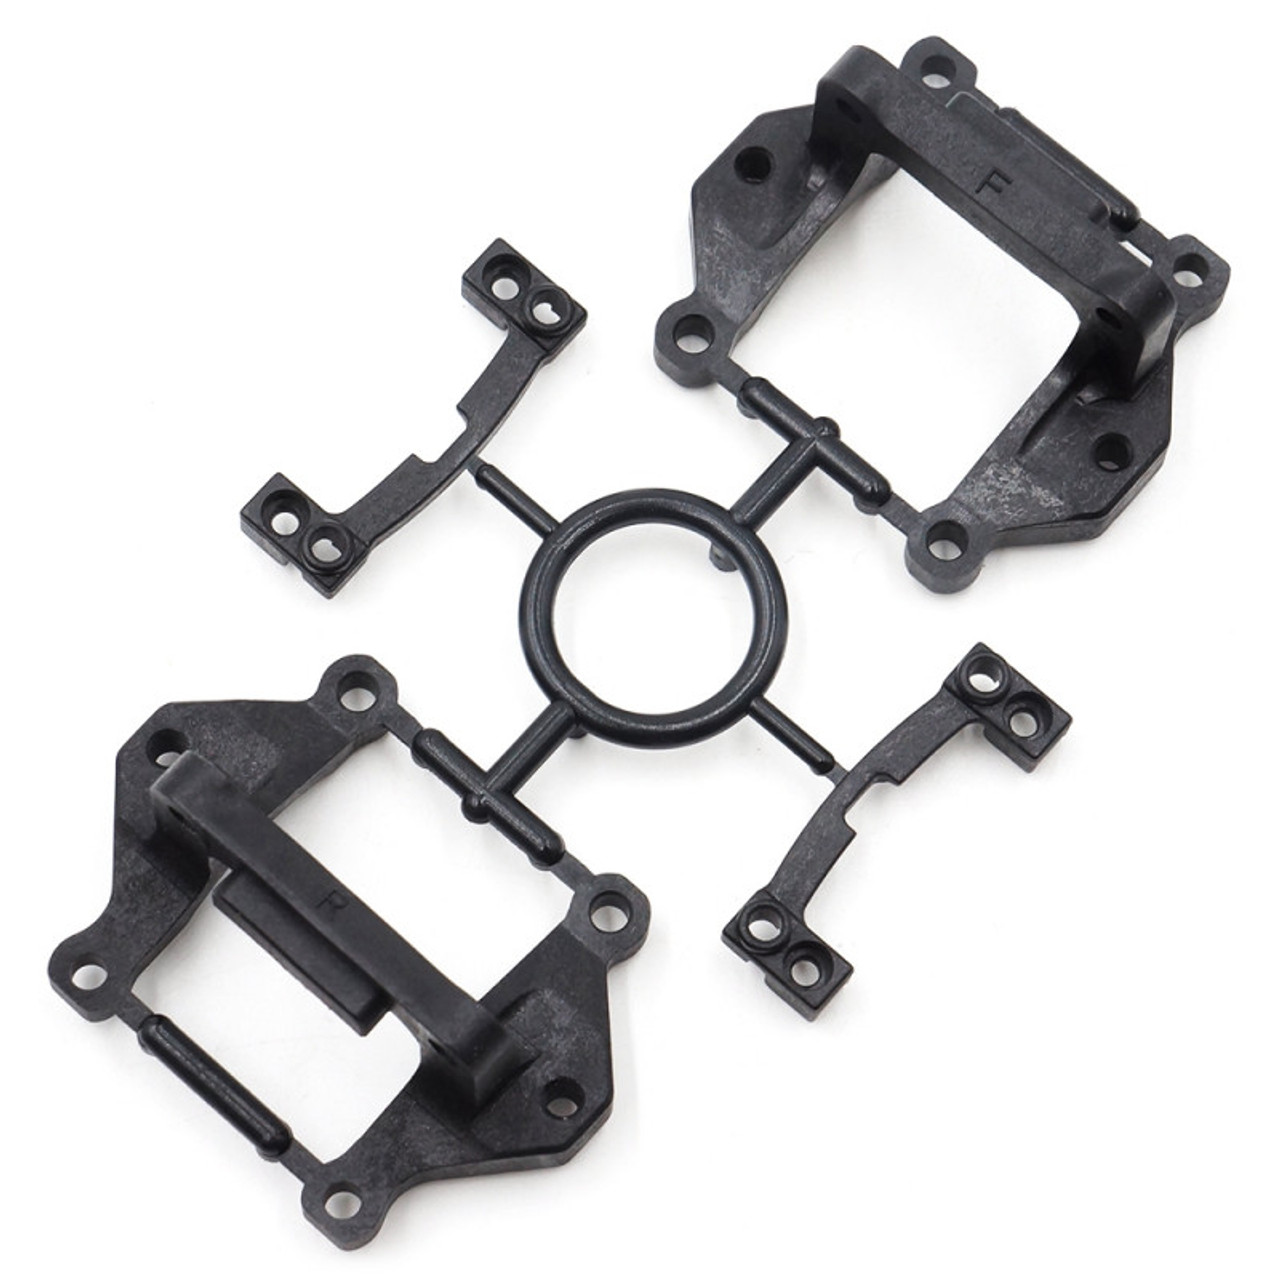 Xpress Execute XQ1S Front and Rear Composite One Piece Upper Clamp